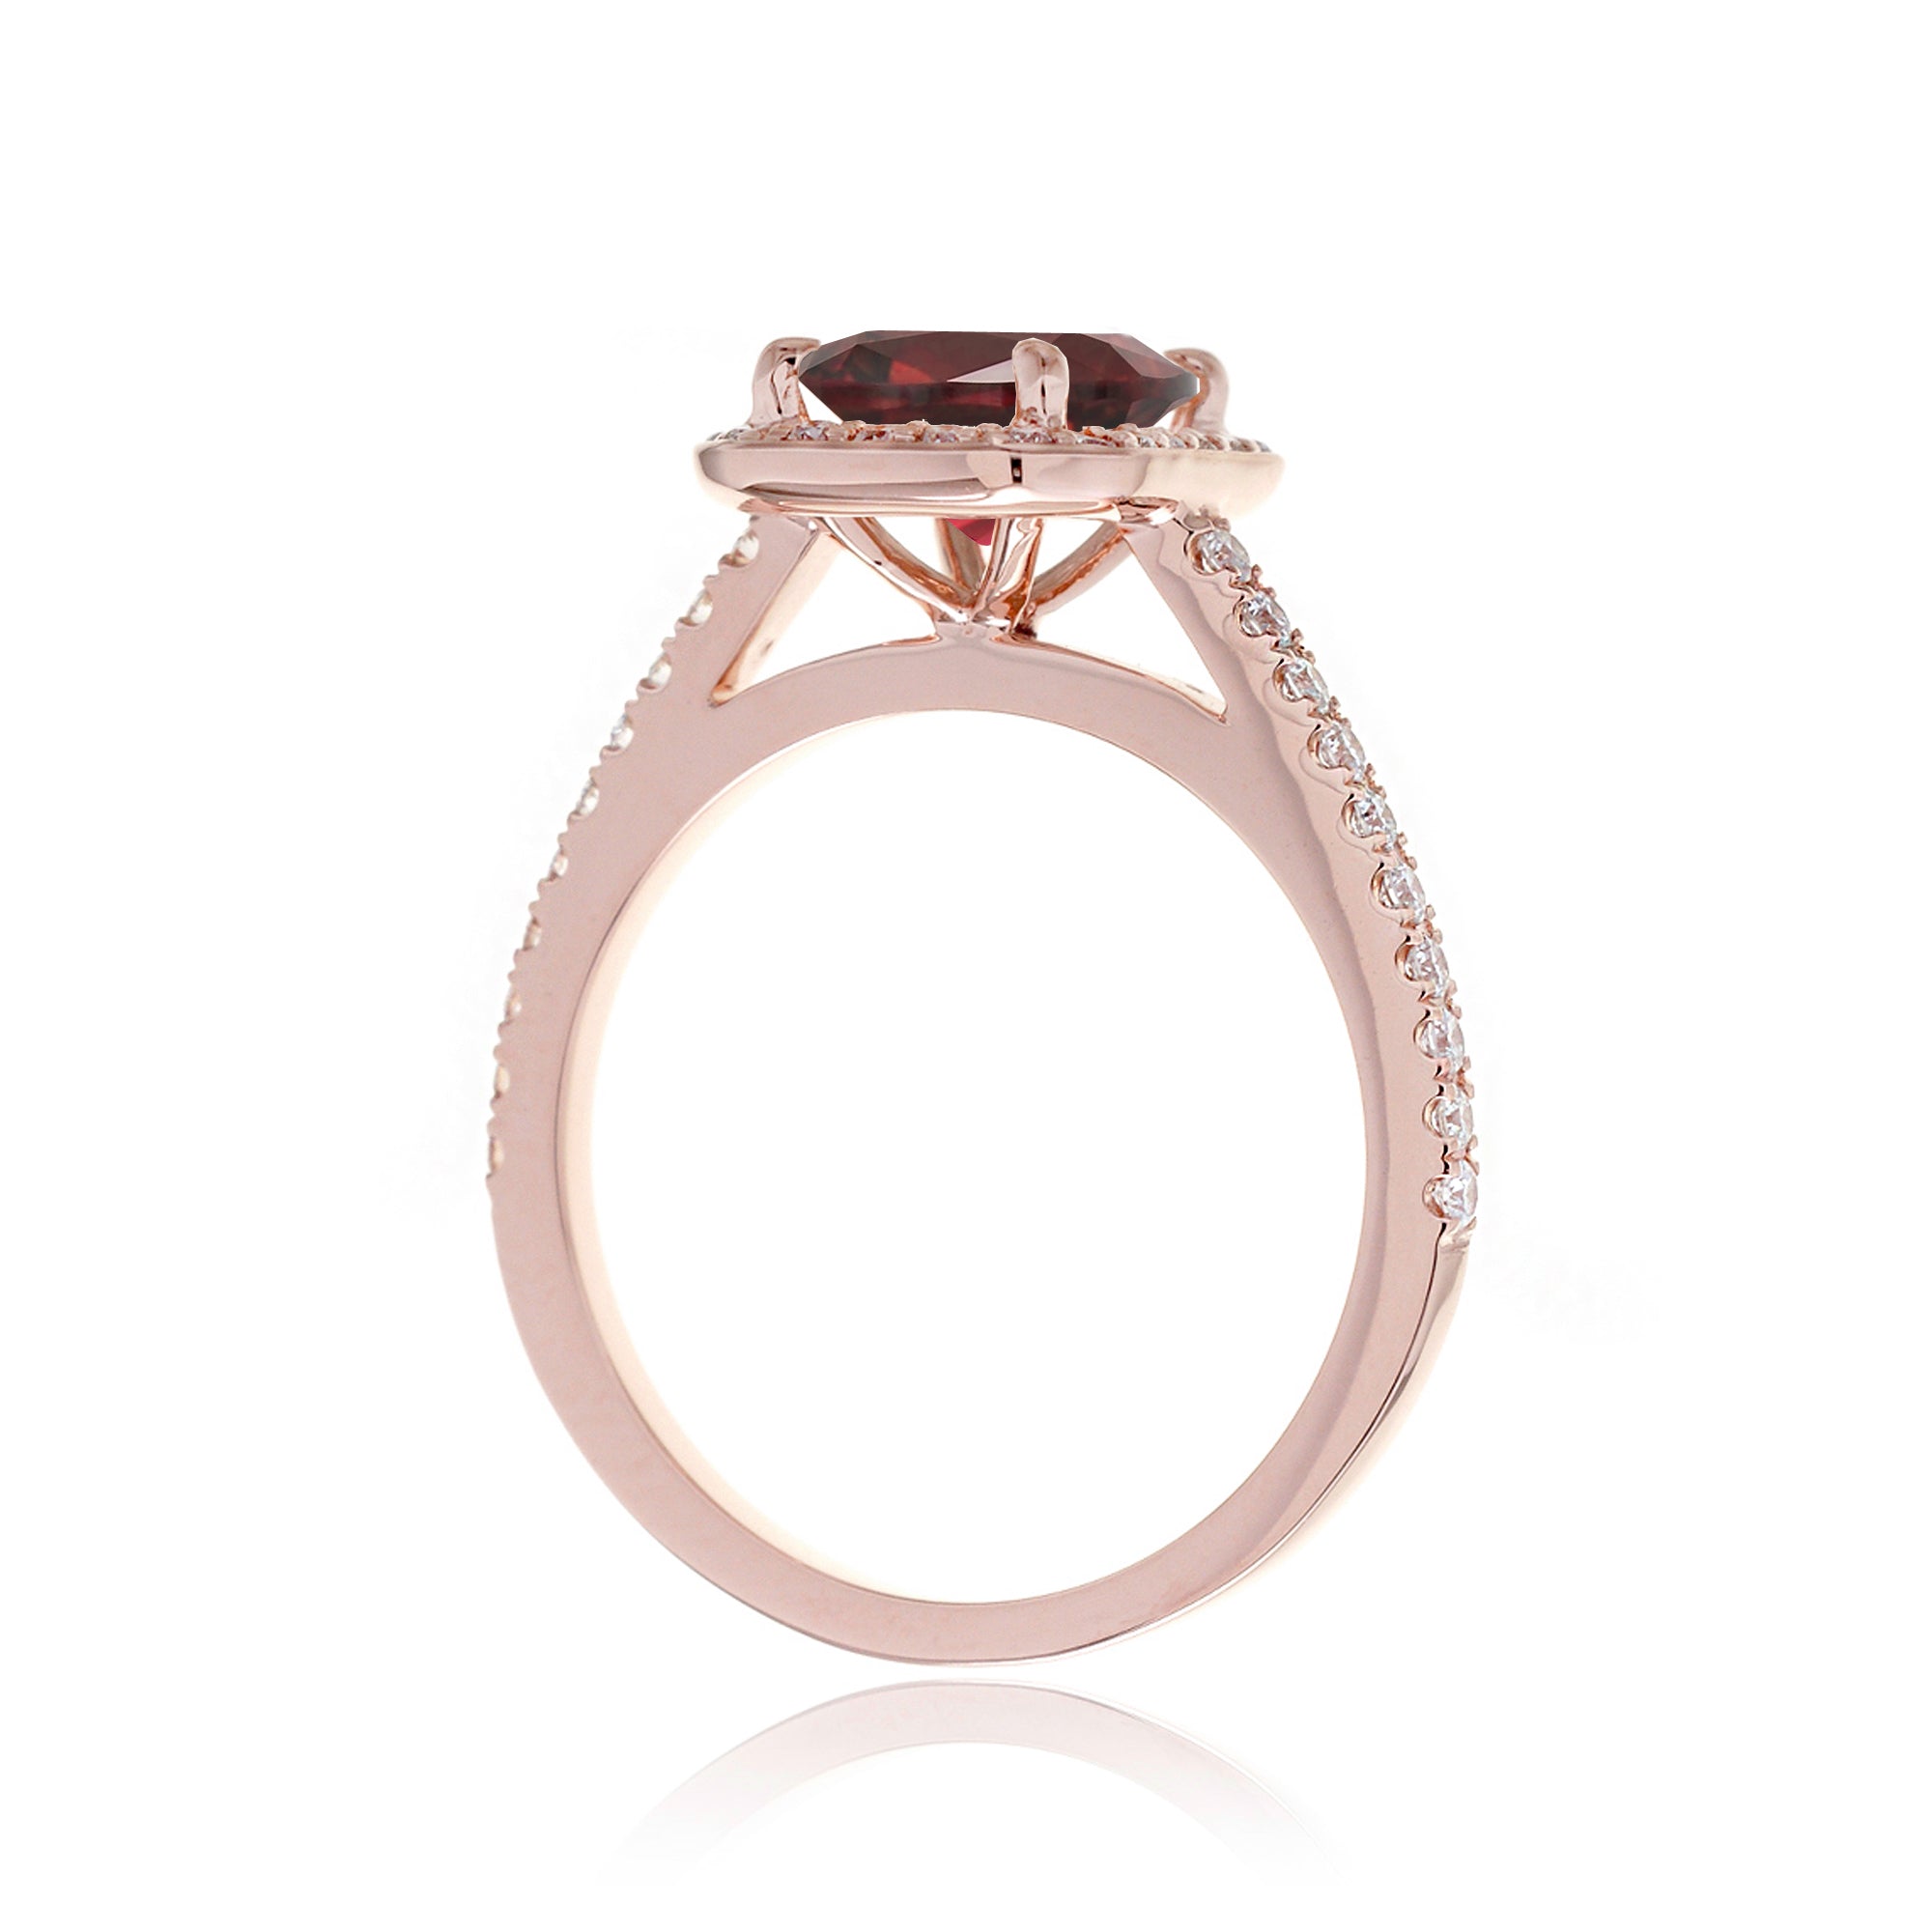 Cushion lab-grown ruby diamond halo cathedral engagement ring - the Steffy rose gold